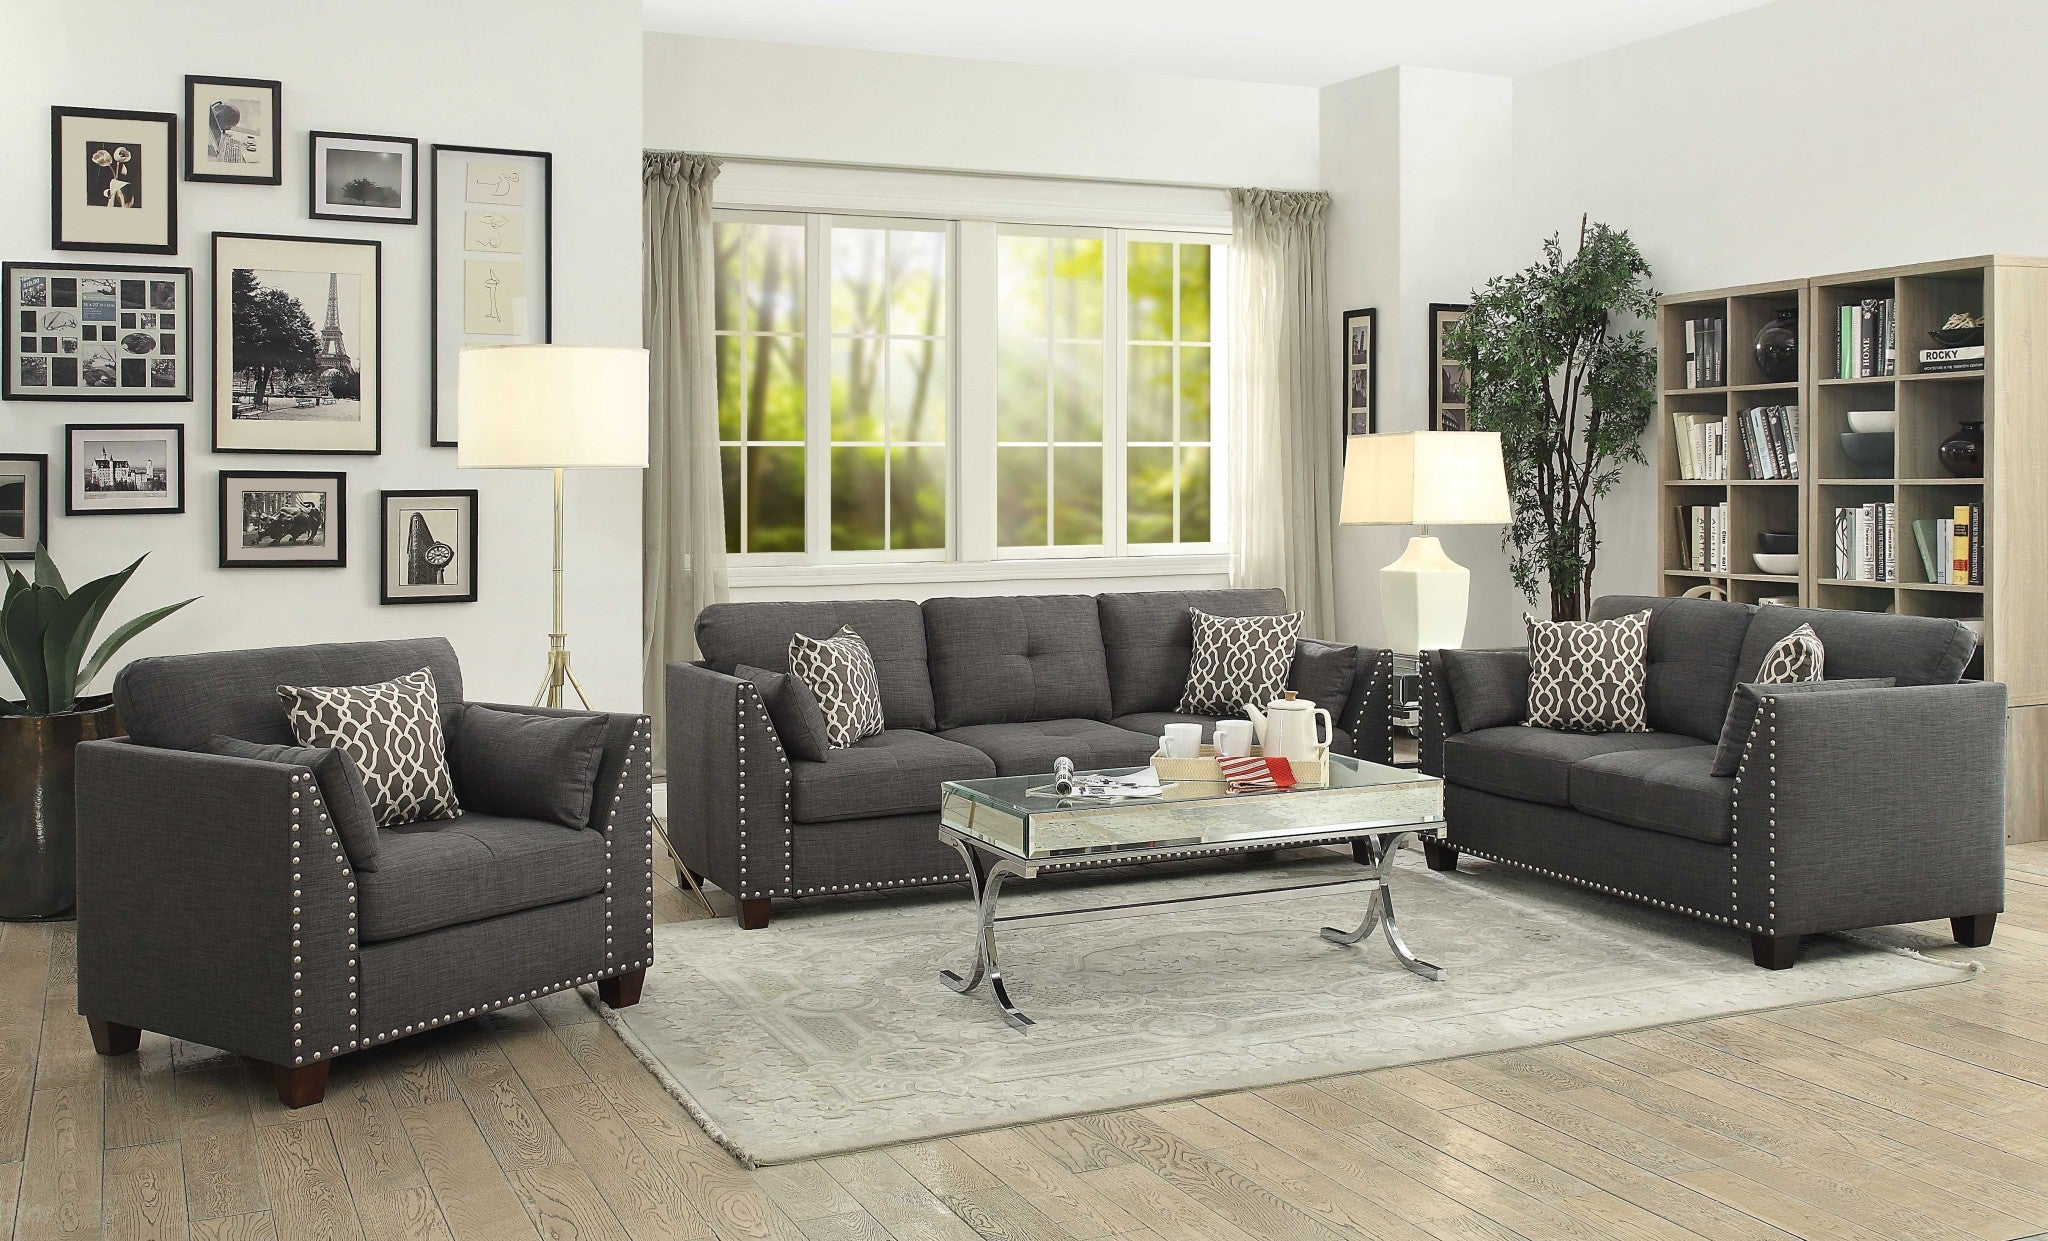 81" Charcoal Linen and Dark Brown Sofa and toss pillows